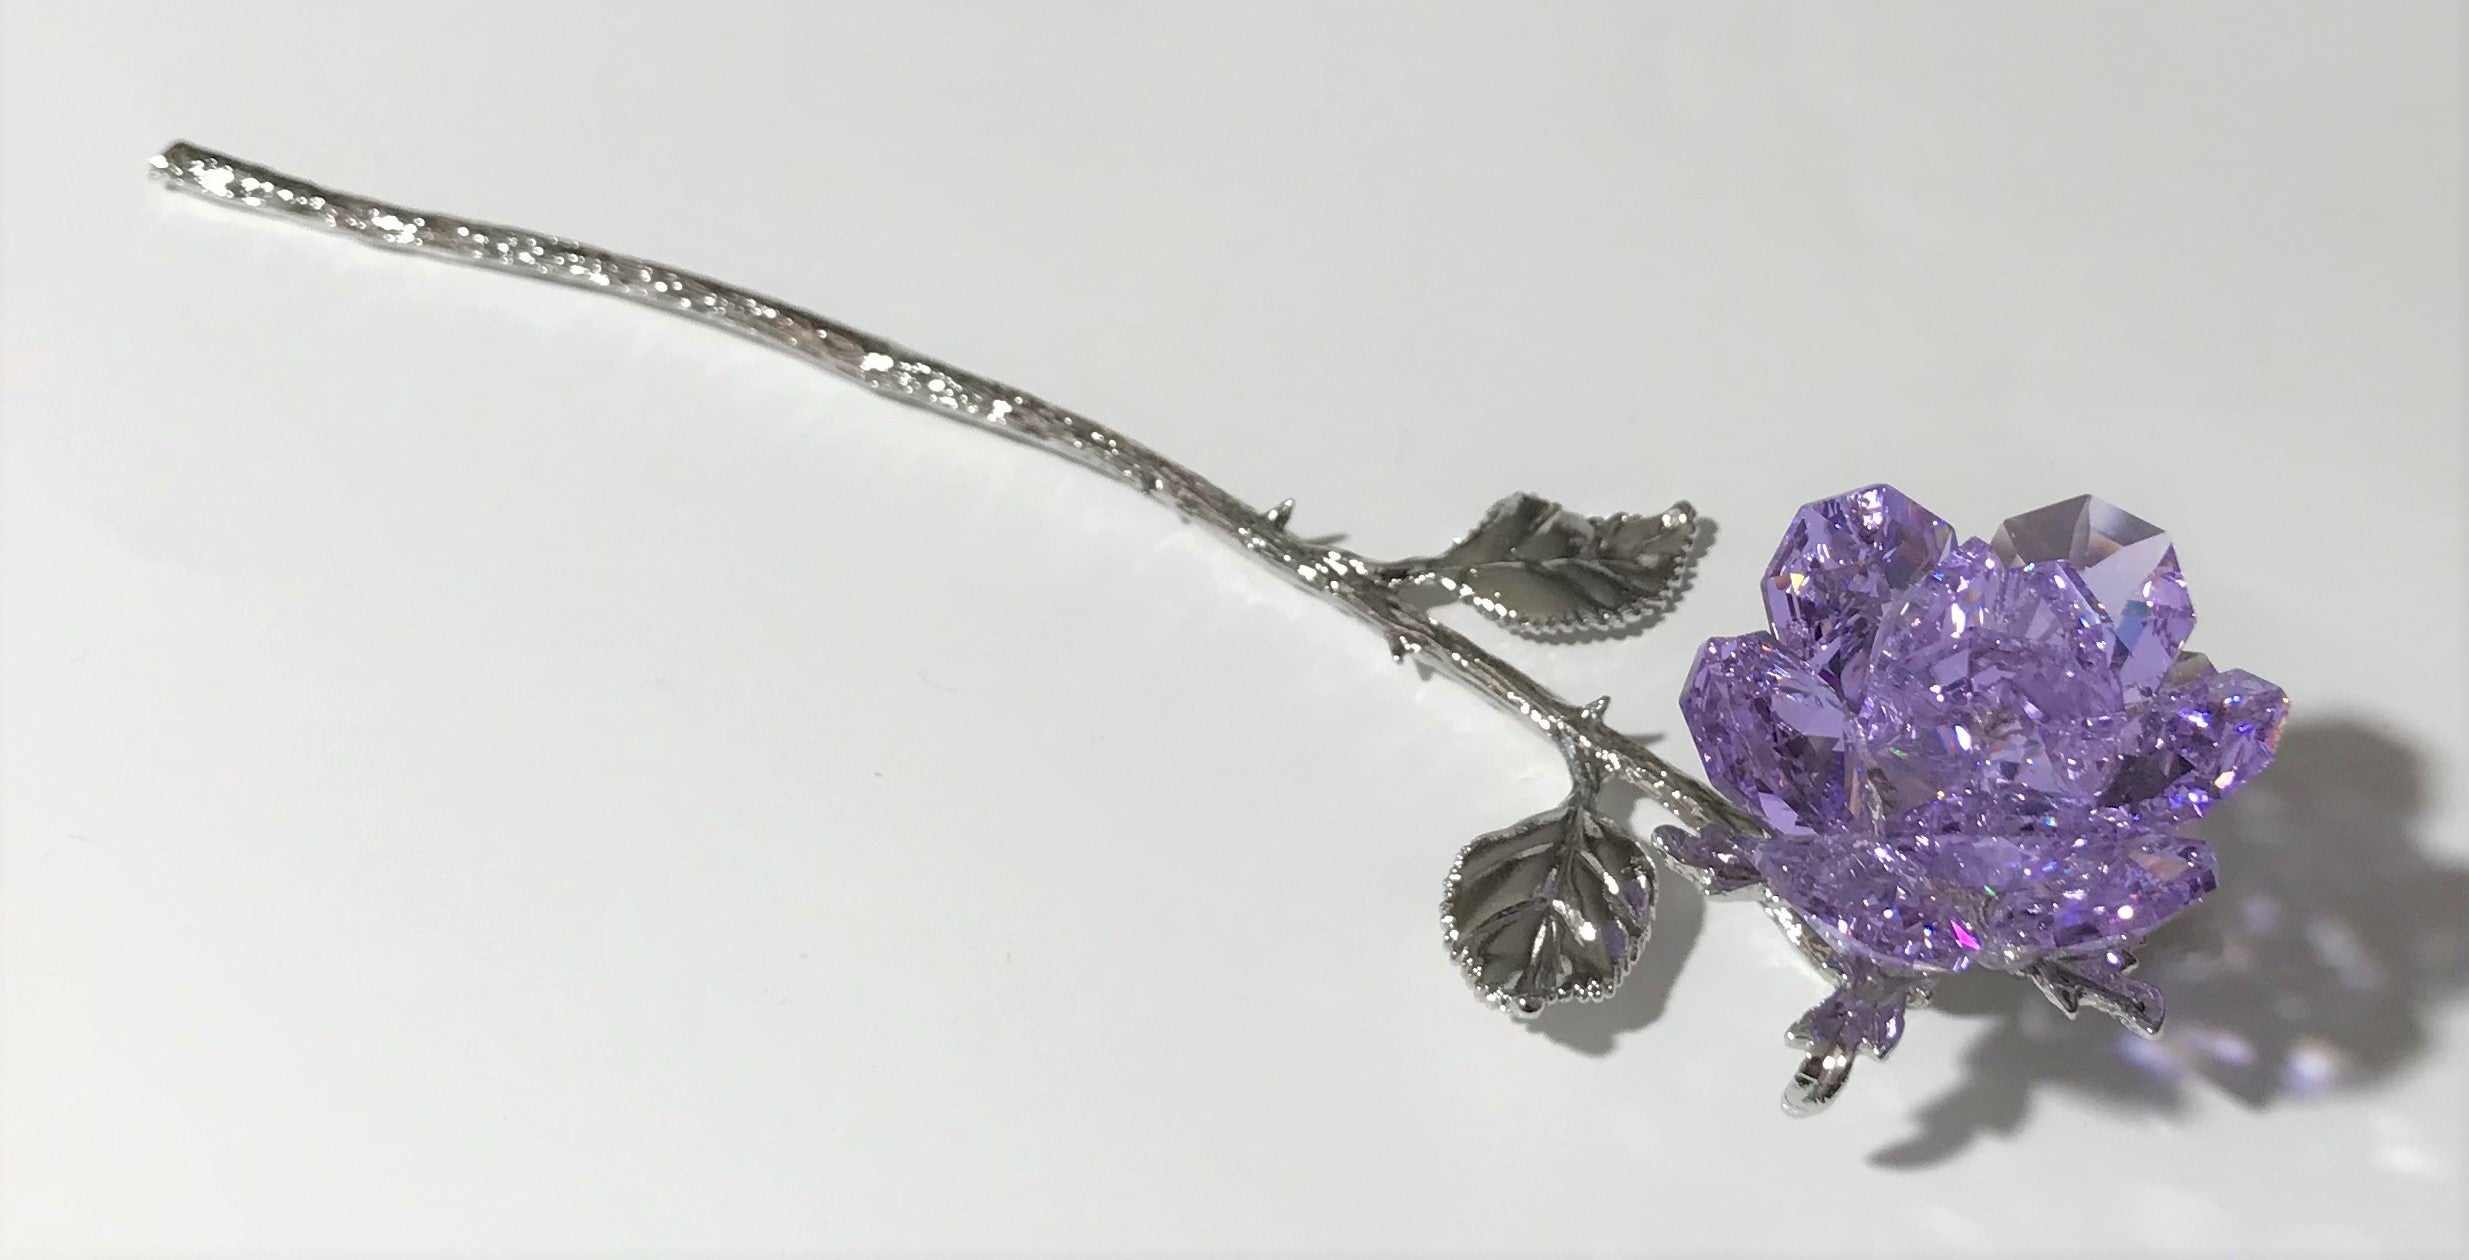 Sparkling Long Stem Purple Crystal Rose - Crystal Purple Flower Hand Crafted By The Artisans At Bjcrystalgifts Using Swarovski Crystals